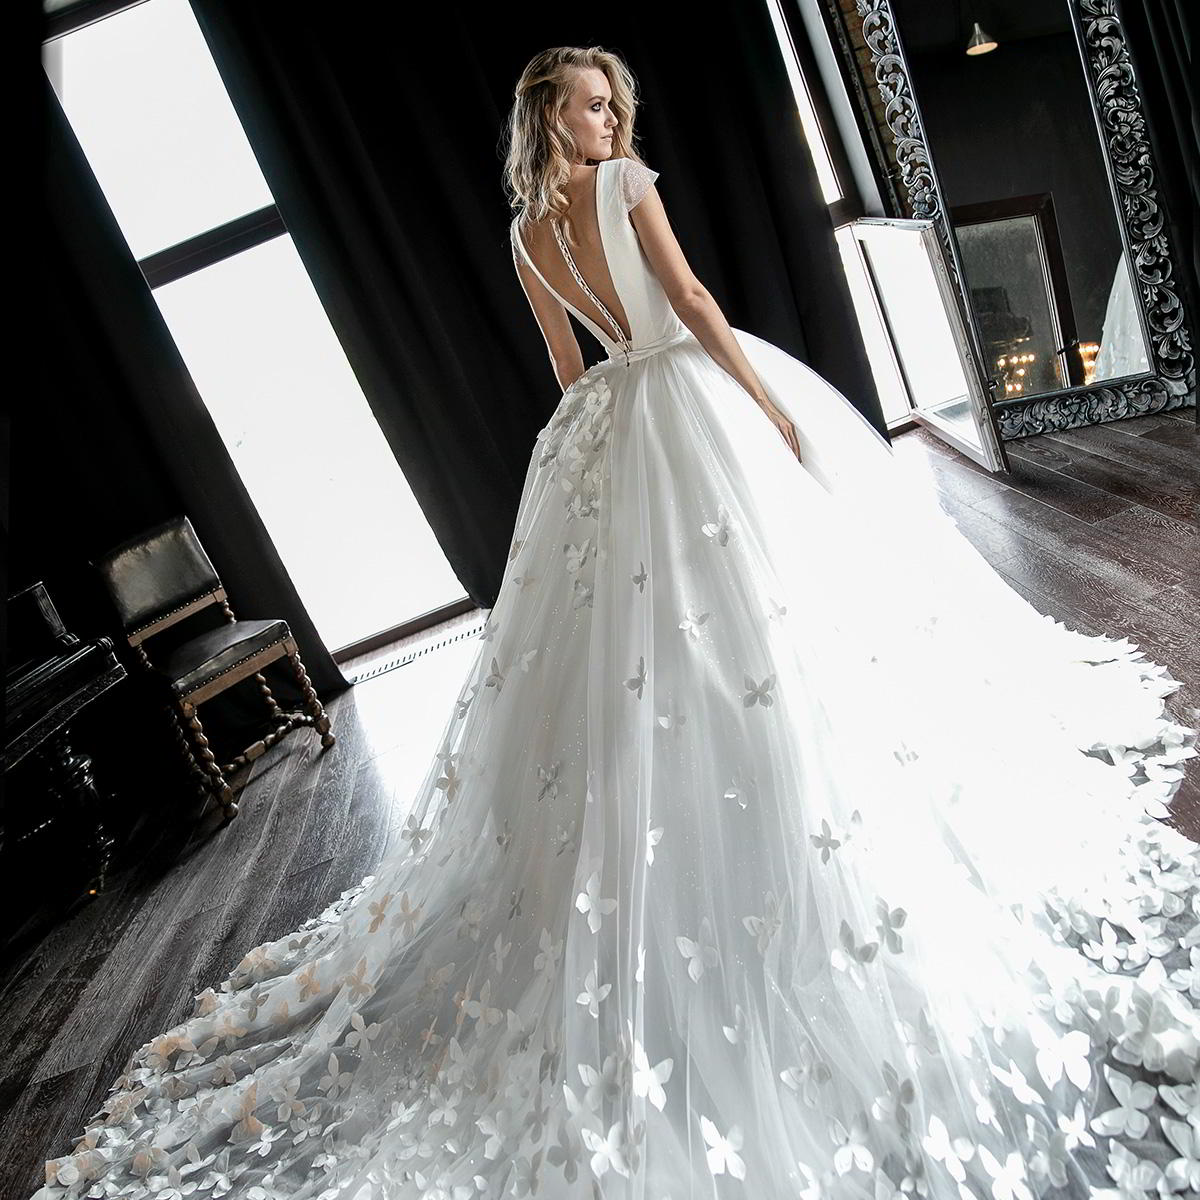 olivia bottega 2019 bridal wedding inspirasi featured wedding gowns dresses and collection